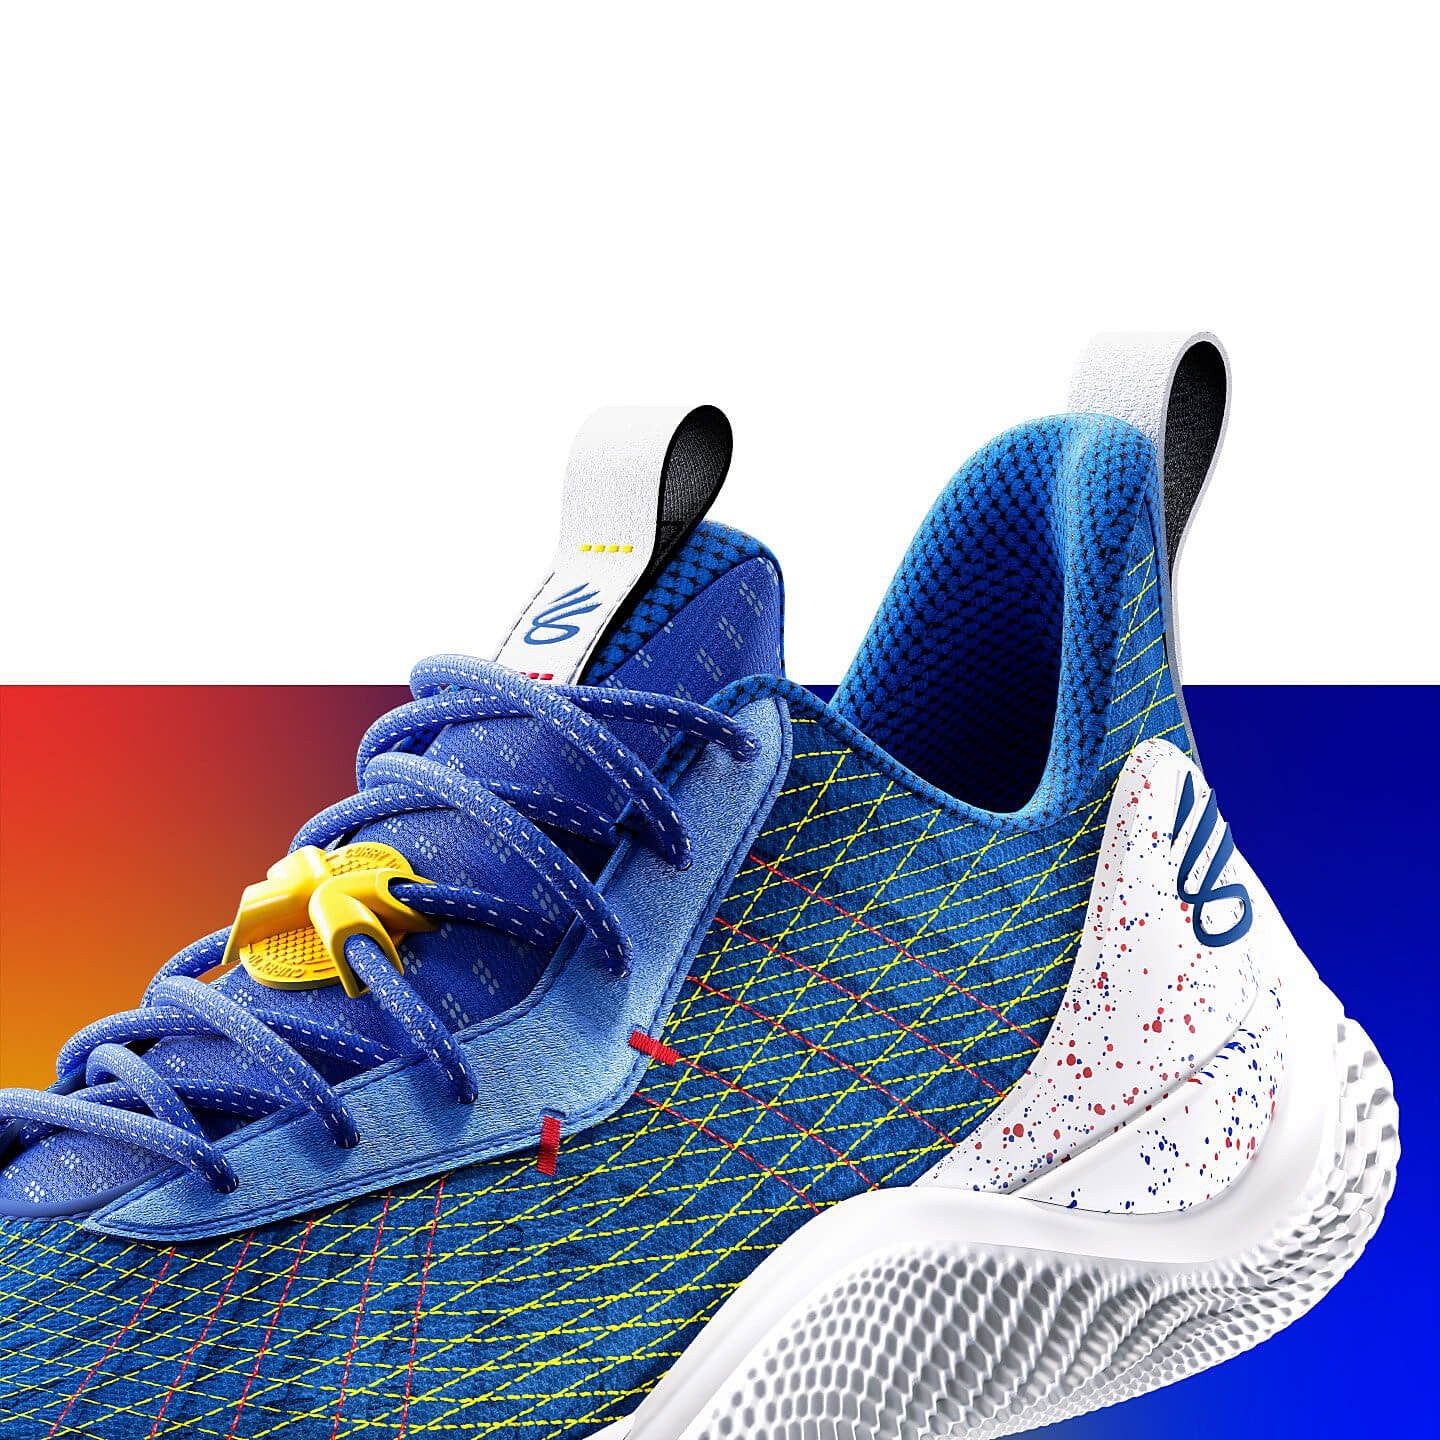 Under Armour Curry Flow 10 'Curry-fornia' Basketball Shoes - Royal/Taxi